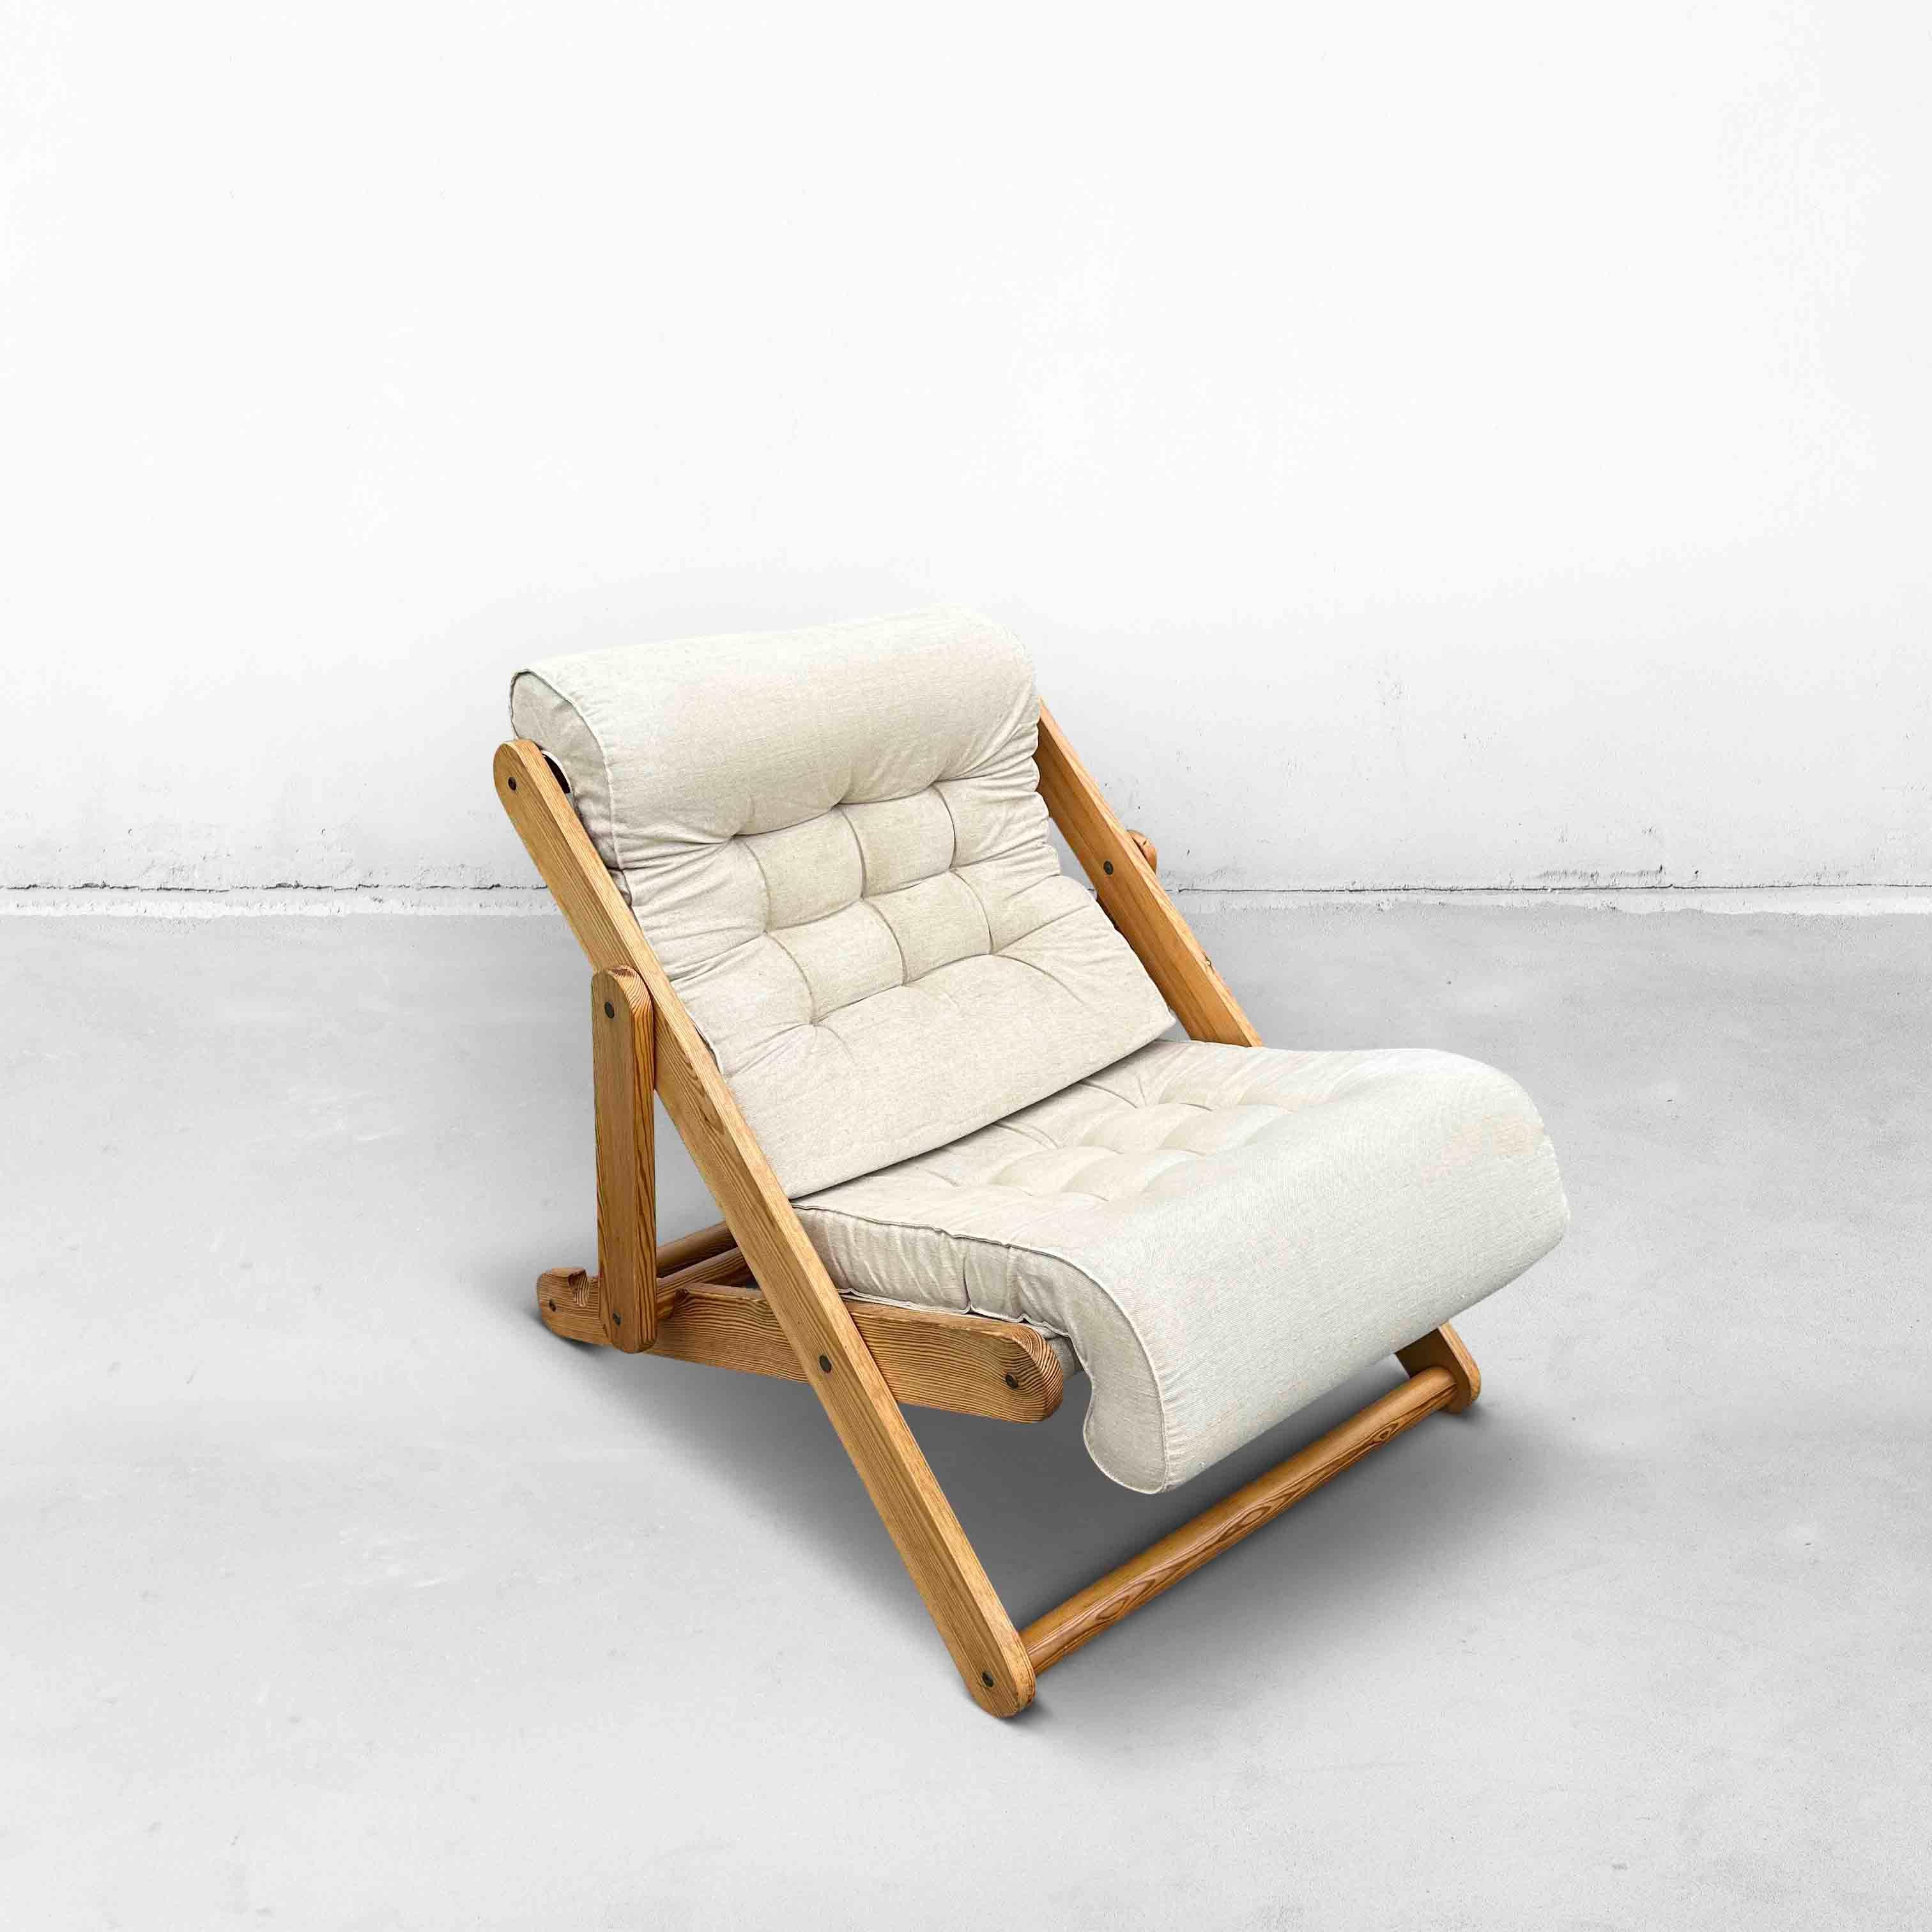 Kon Tiki lounge chair was designed by Gillis Lundgren for Ikea in the 1970s.
This adjustable lounge chair is made of pine and has a seat of beige canvas. The cushion is still in very good condition, but the fabric shows some discoloration. A lovely